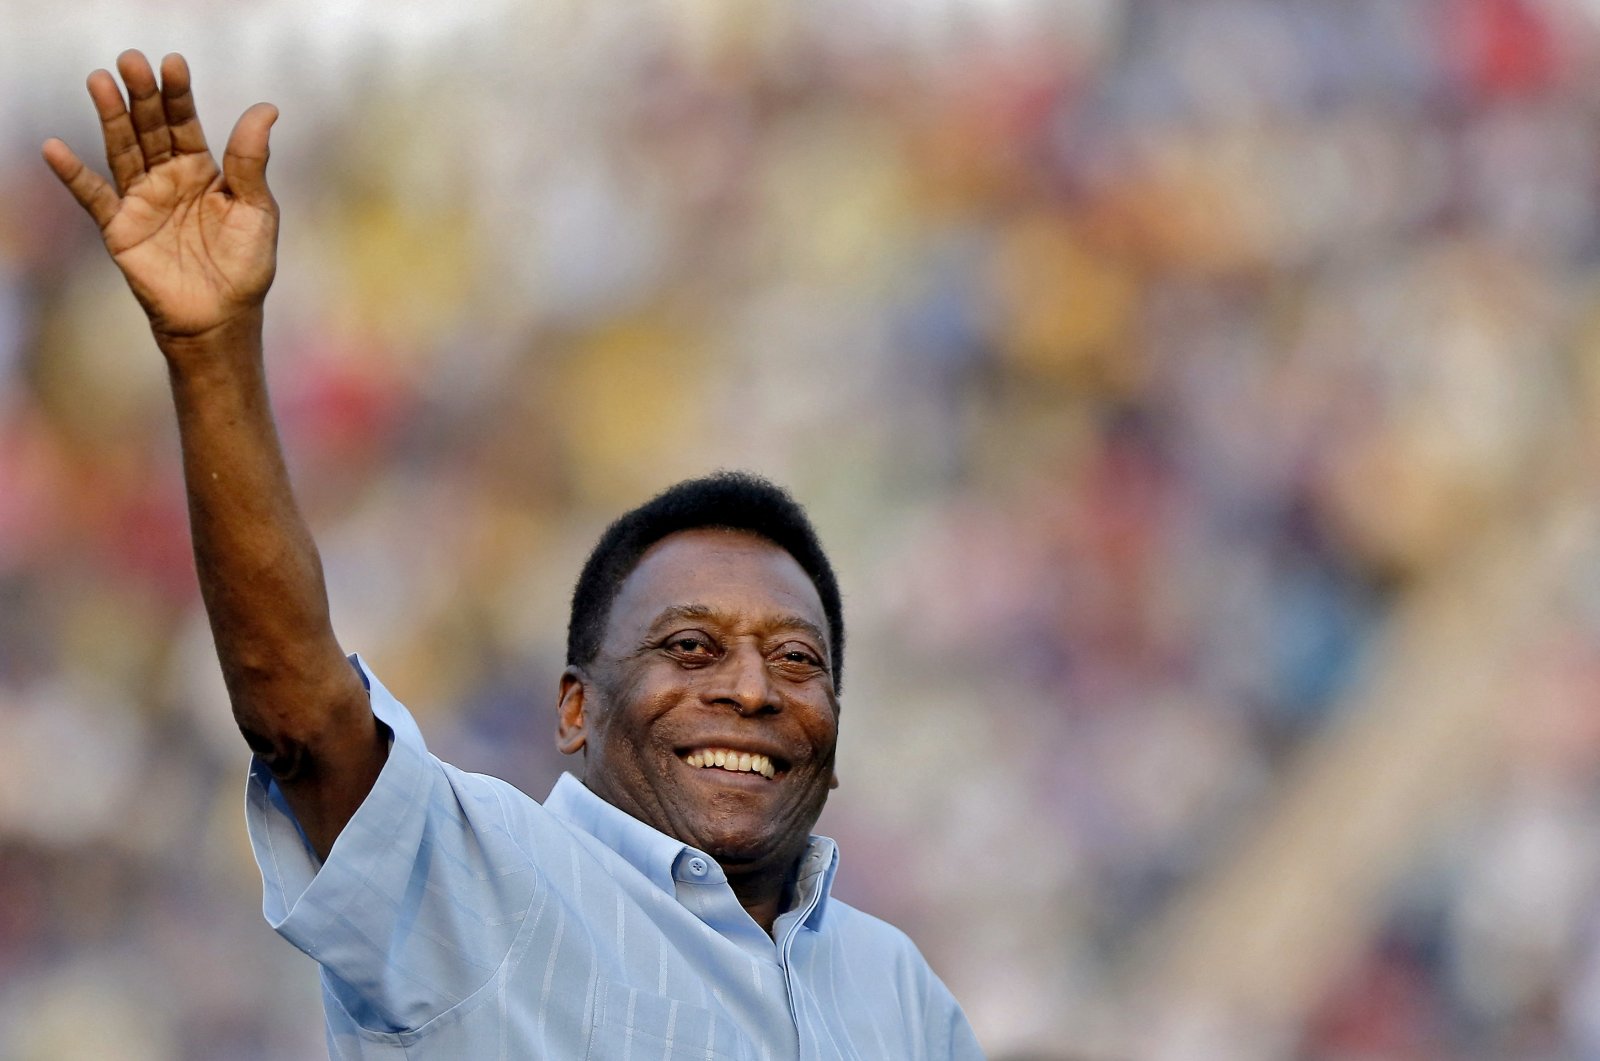 Legendary Brazilian soccer player Pele waves to the spectators before the start of the under-17 boys&#039; final football match of the Subroto Cup tournament at Ambedkar stadium in New Delhi, India, Oct. 16, 2015. (Reuters Photo)